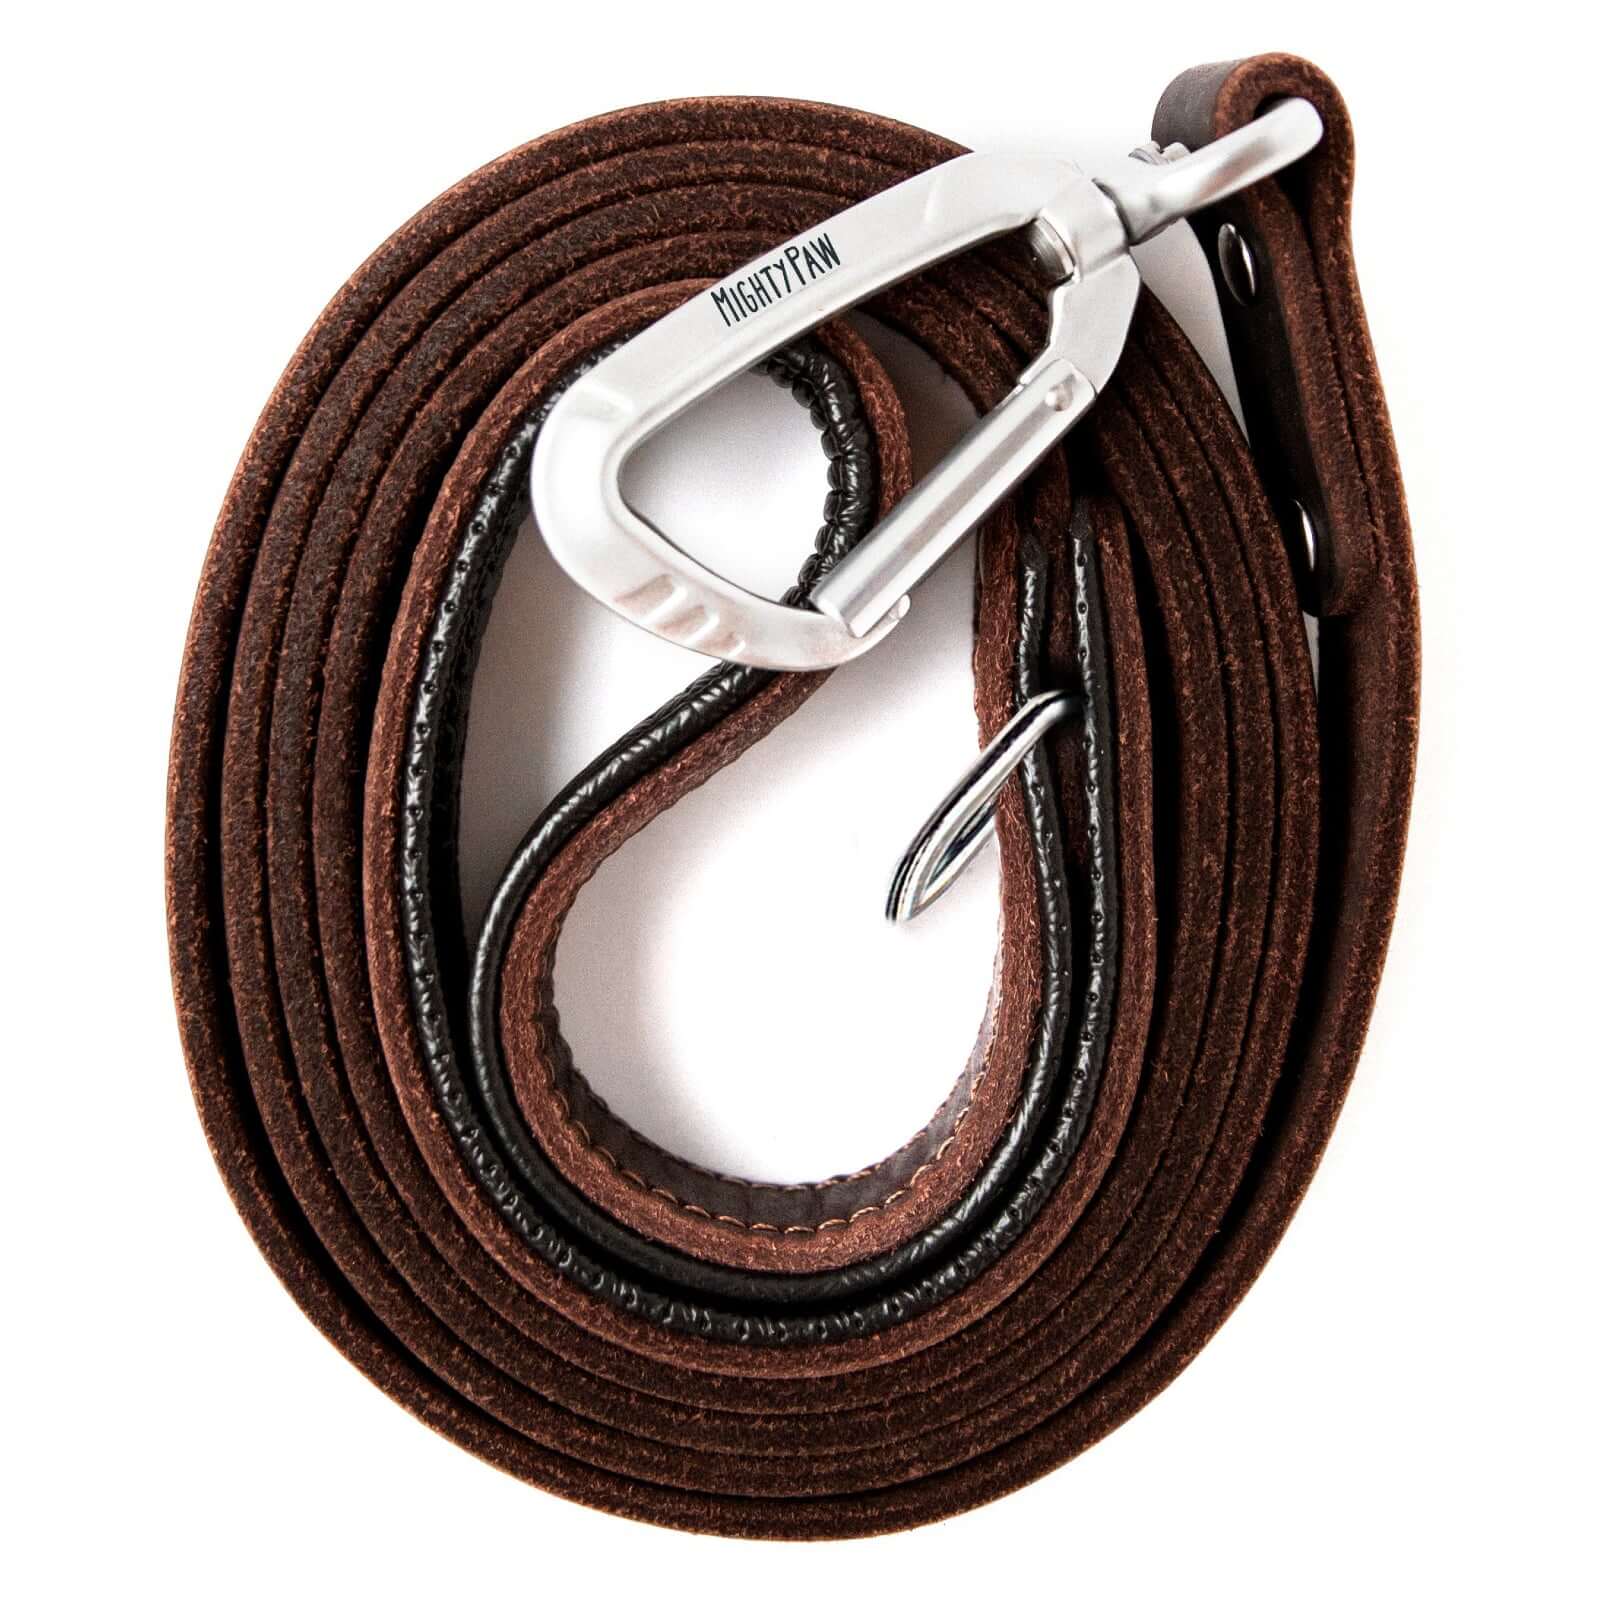 6 Ft Leather Dog Leash. Padded Handle with Carabiner Clip